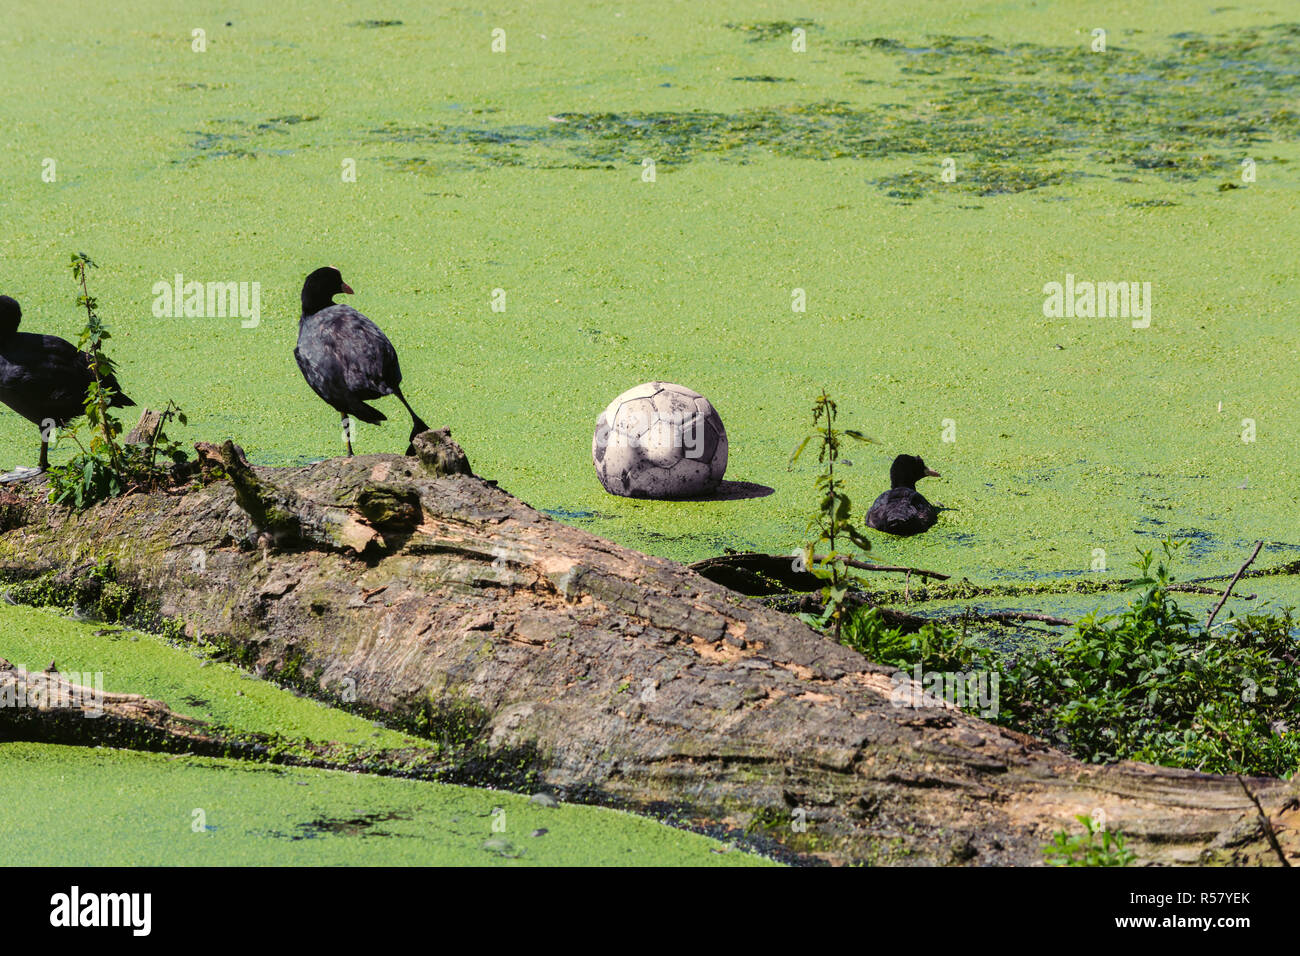 ducks and soccer in a pond Stock Photo